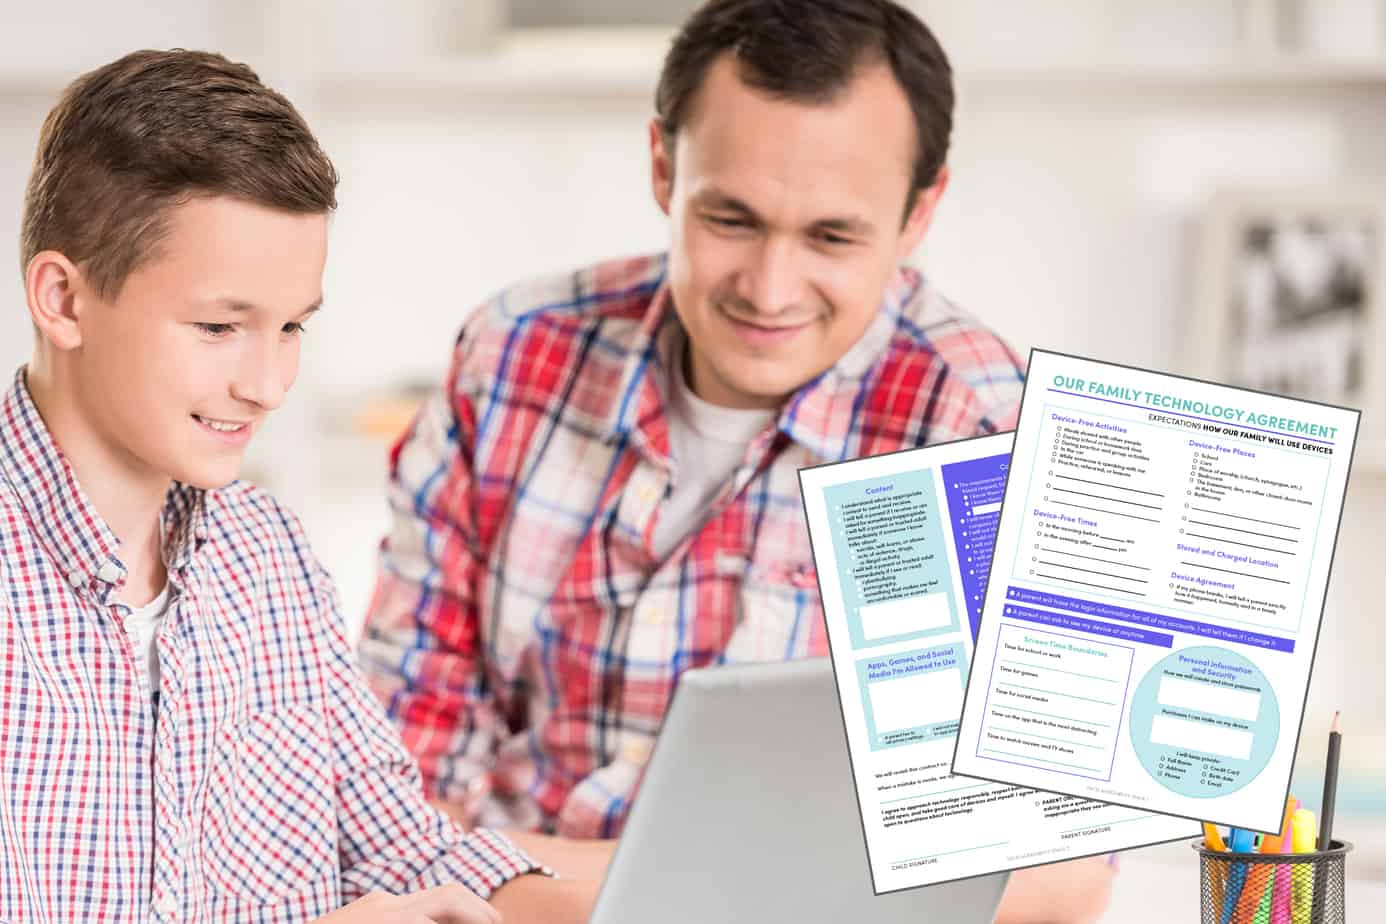 Family Technology Agreement Template — A FREE Download for You!